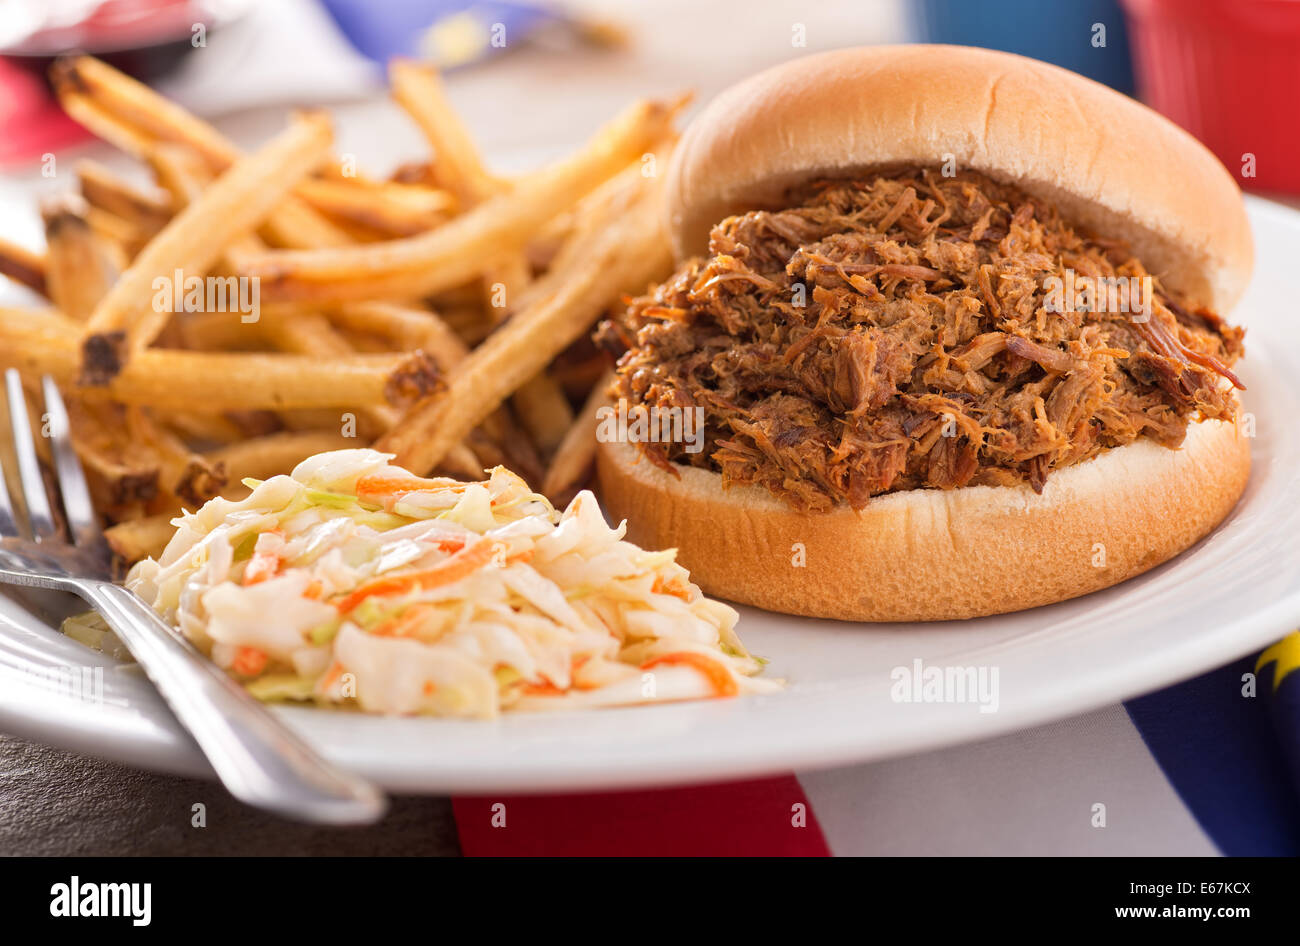 A delicious barbecued pulled pork sandwich with coleslaw and french fries. Stock Photo